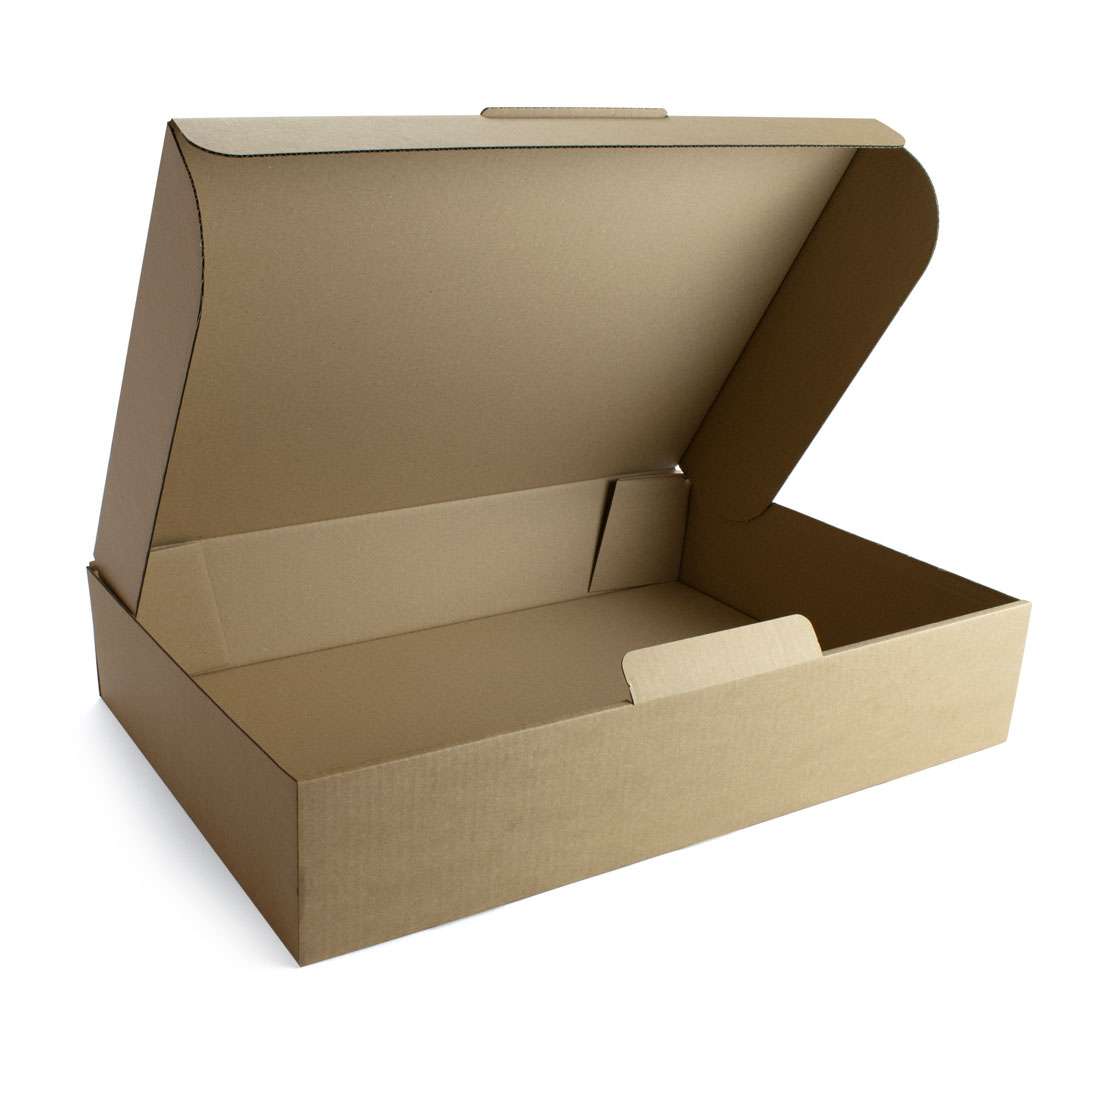 Extra Large Cardboard Boxes Shipping  White Box Packaging Cardboard Large  - Gift Boxes & Bags - Aliexpress